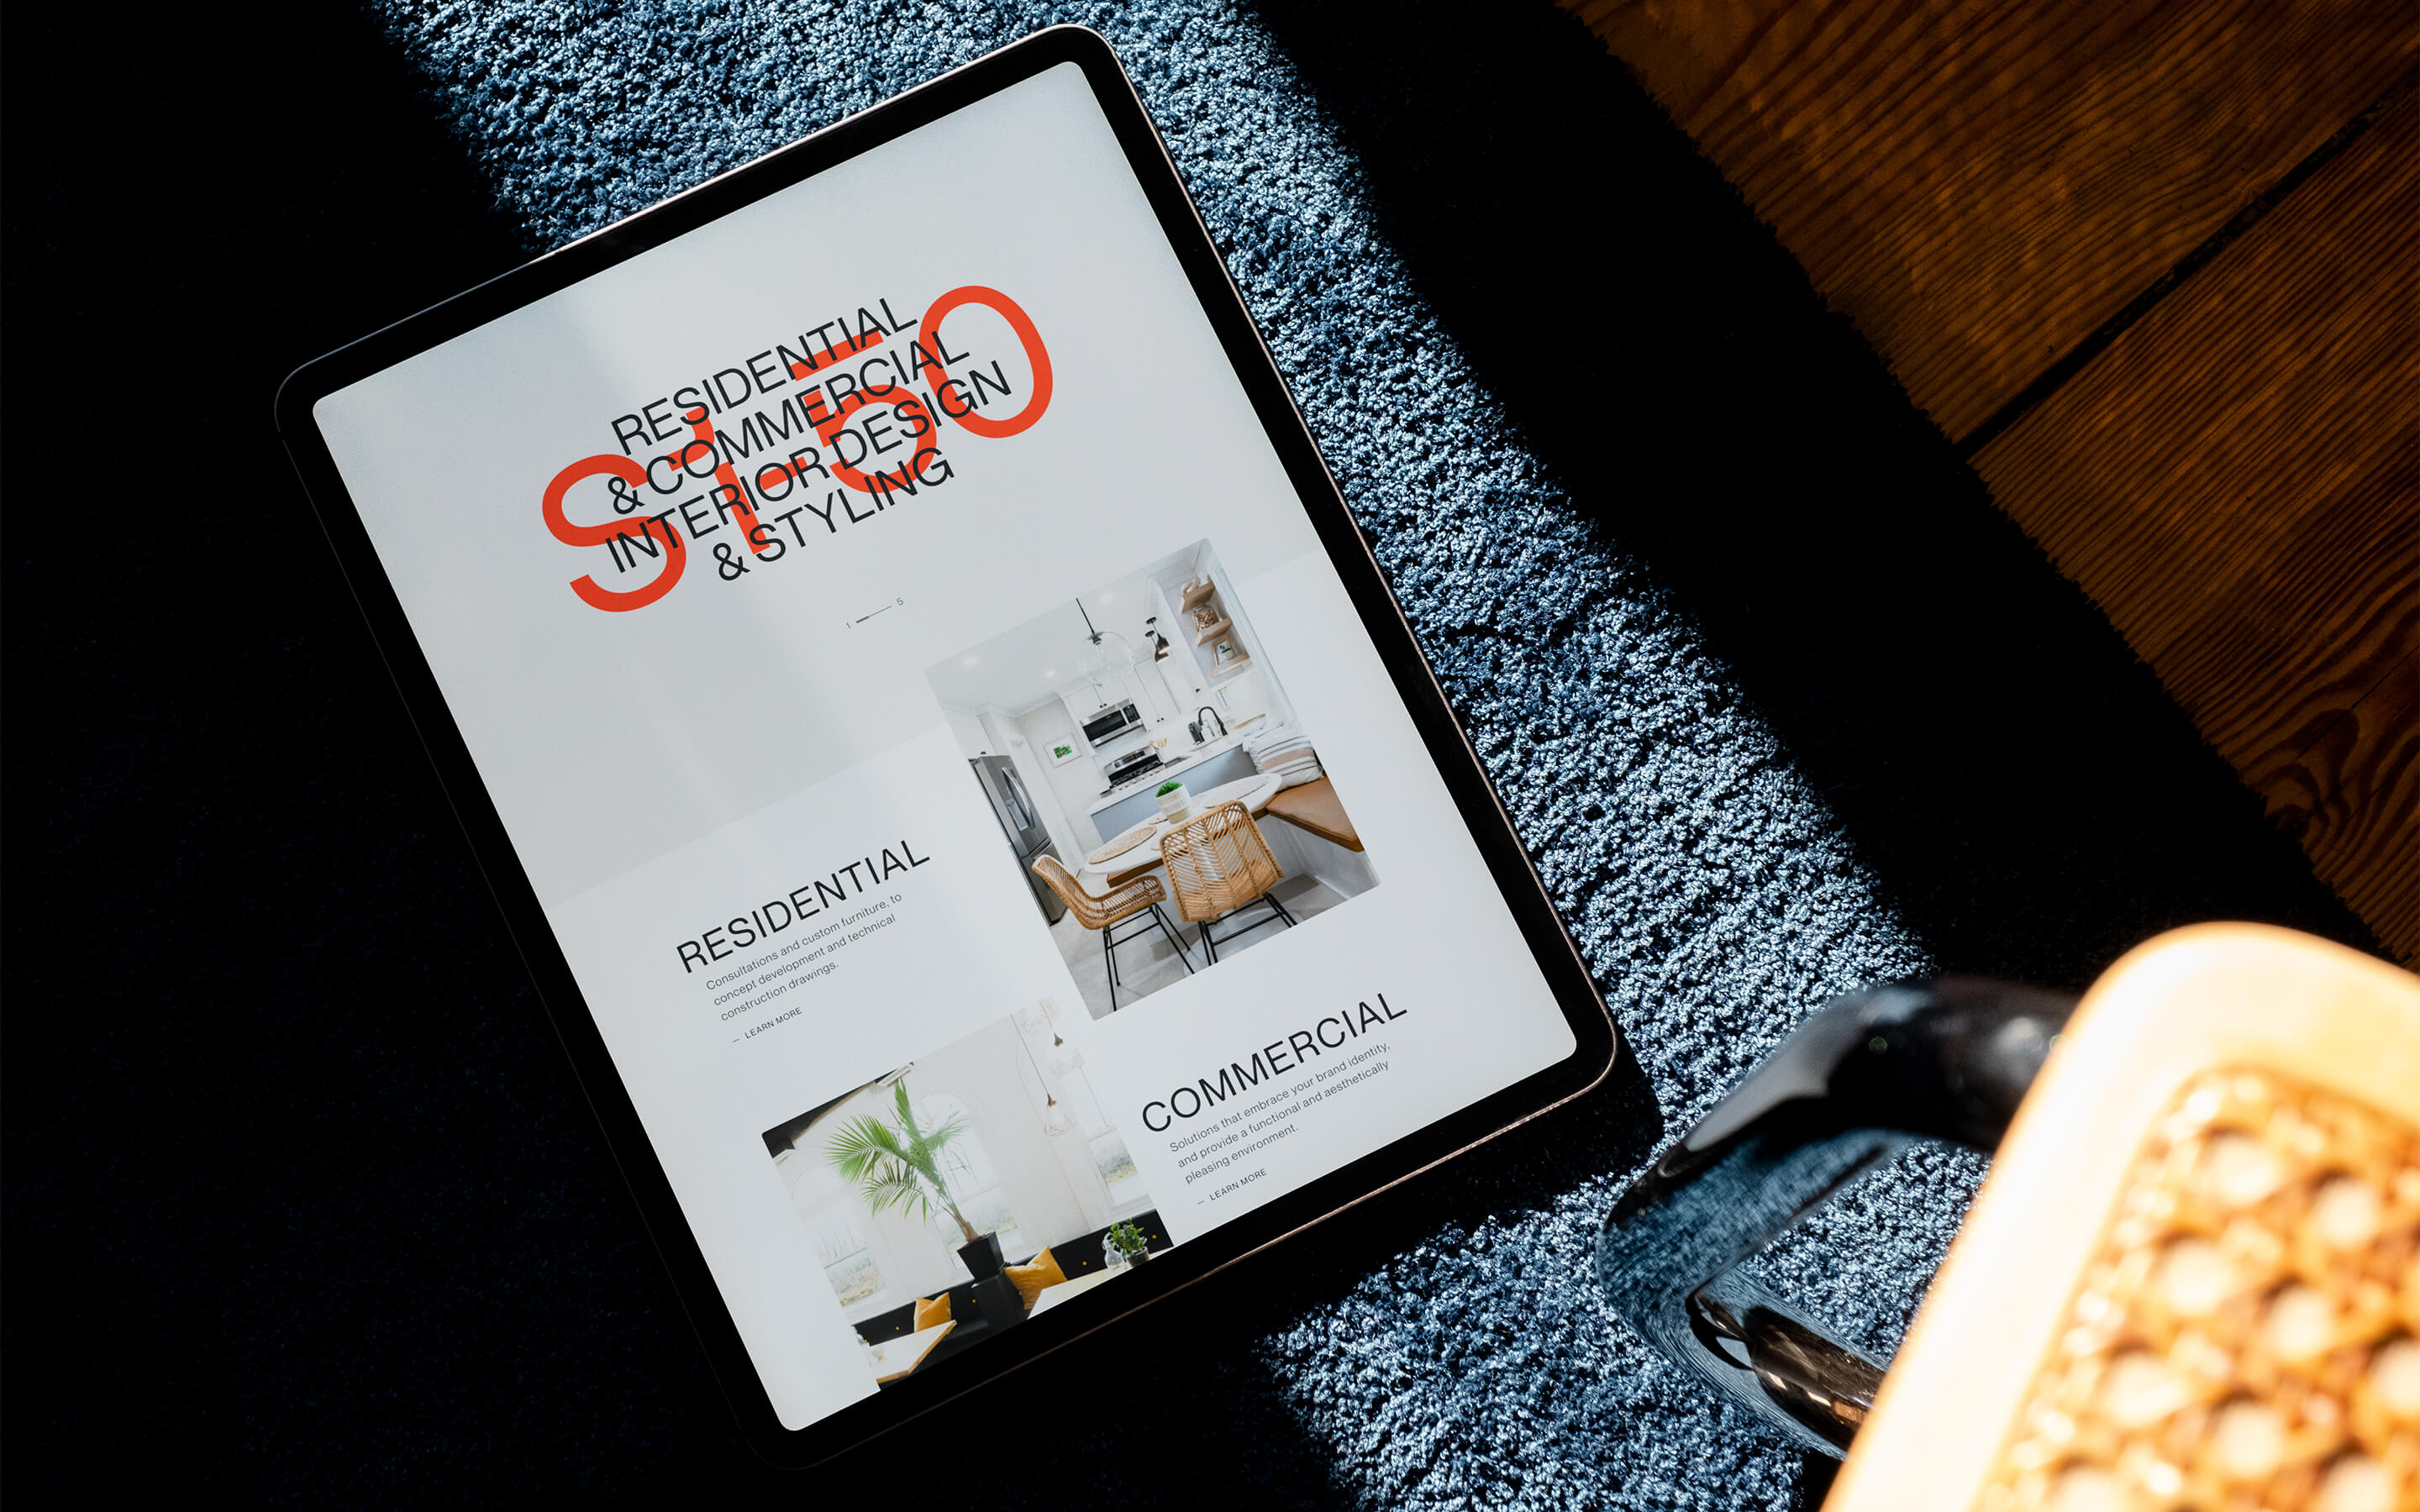 Studio One-Fifty website's displayed on an iPad